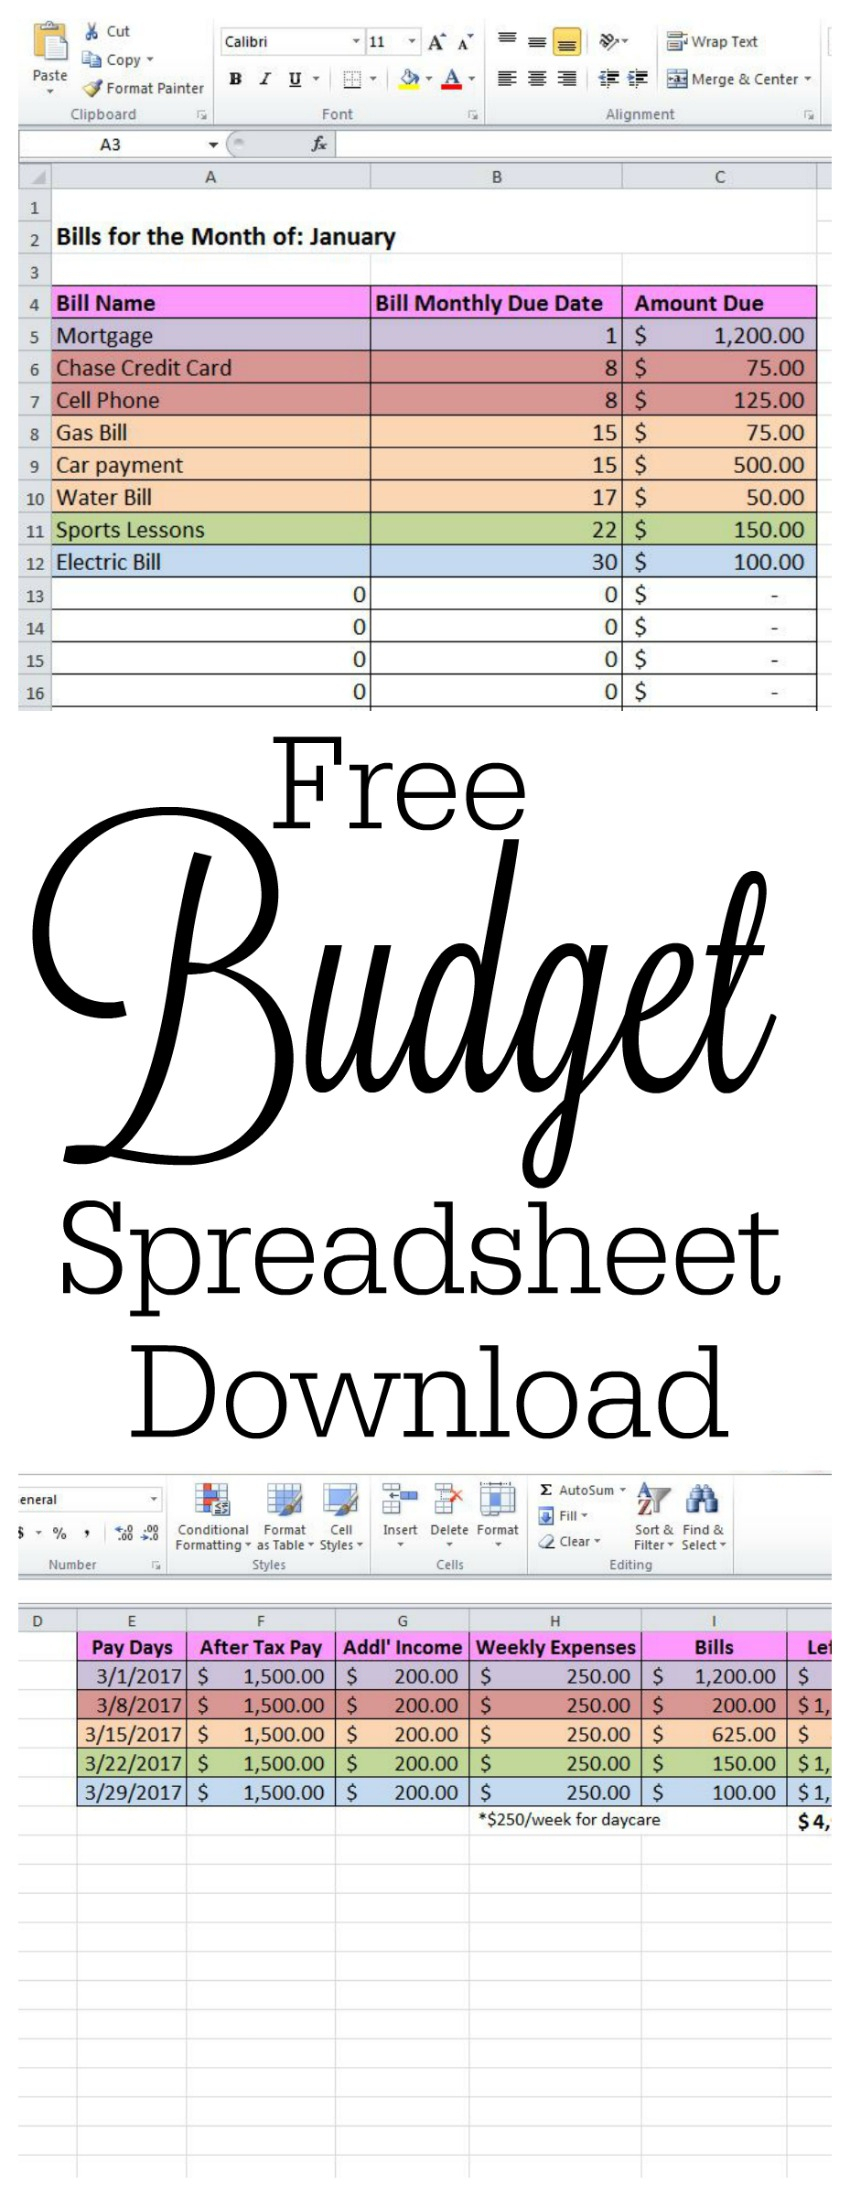 How To Keep Track Of Spending Spreadsheet throughout Free Budget Spreadsheet And How To Keep Track Of Passwords  The